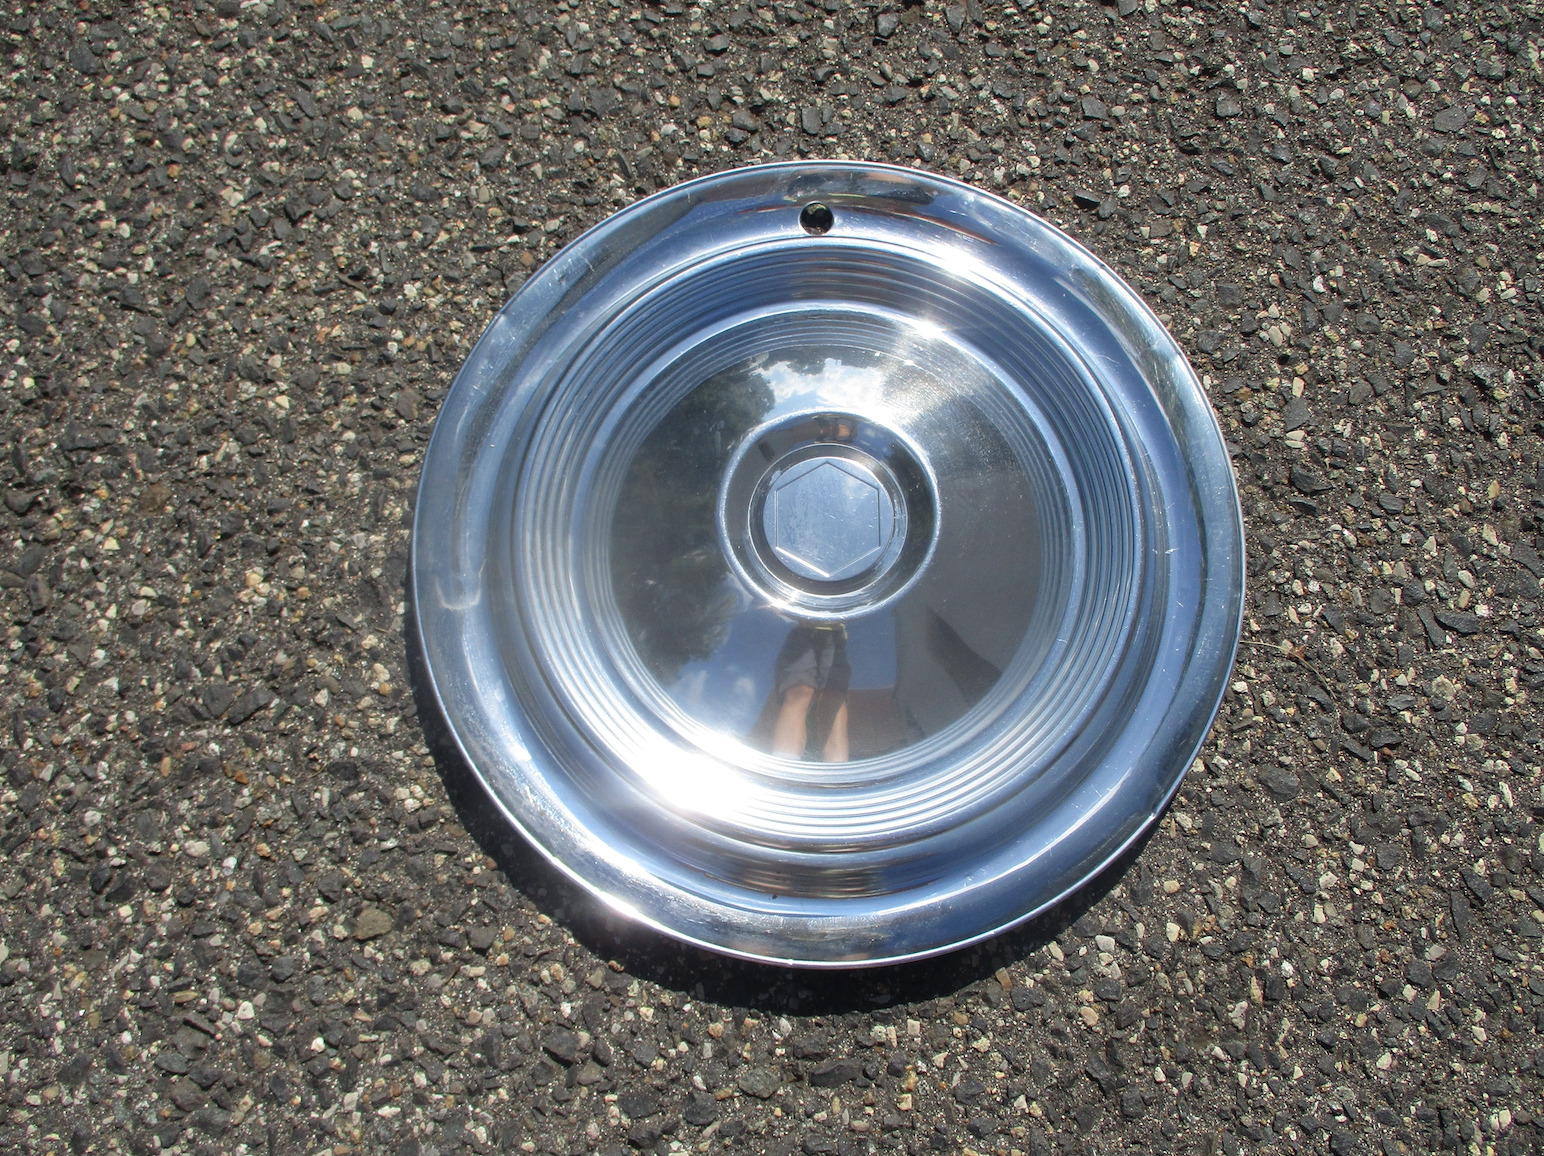 One 1955 to 1957 Packard Clipper Caribbean 15 inch hubcap wheel cover